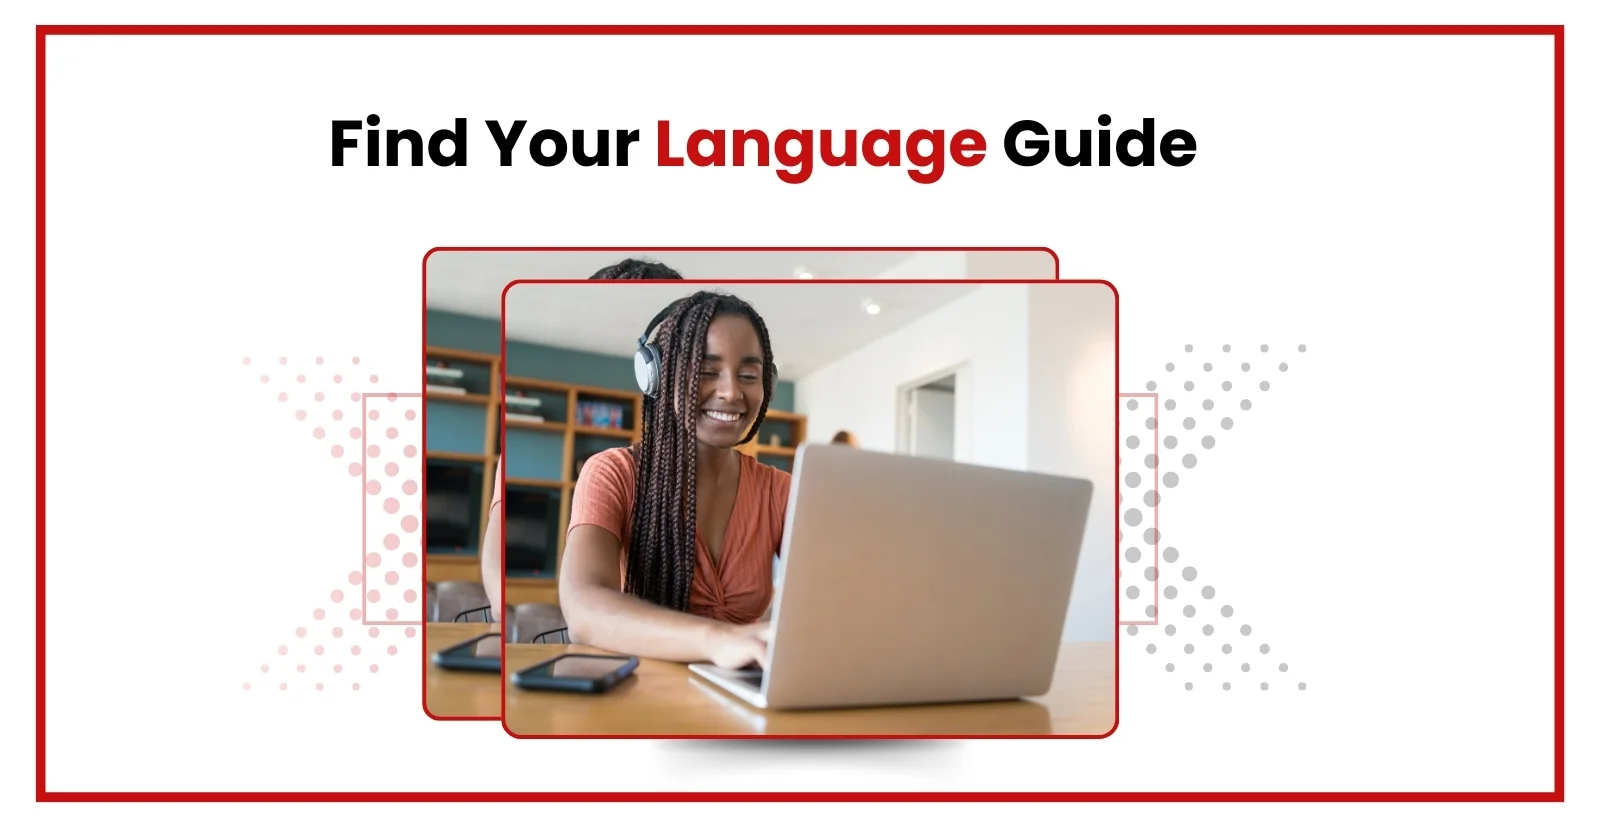 Find your Language Guide